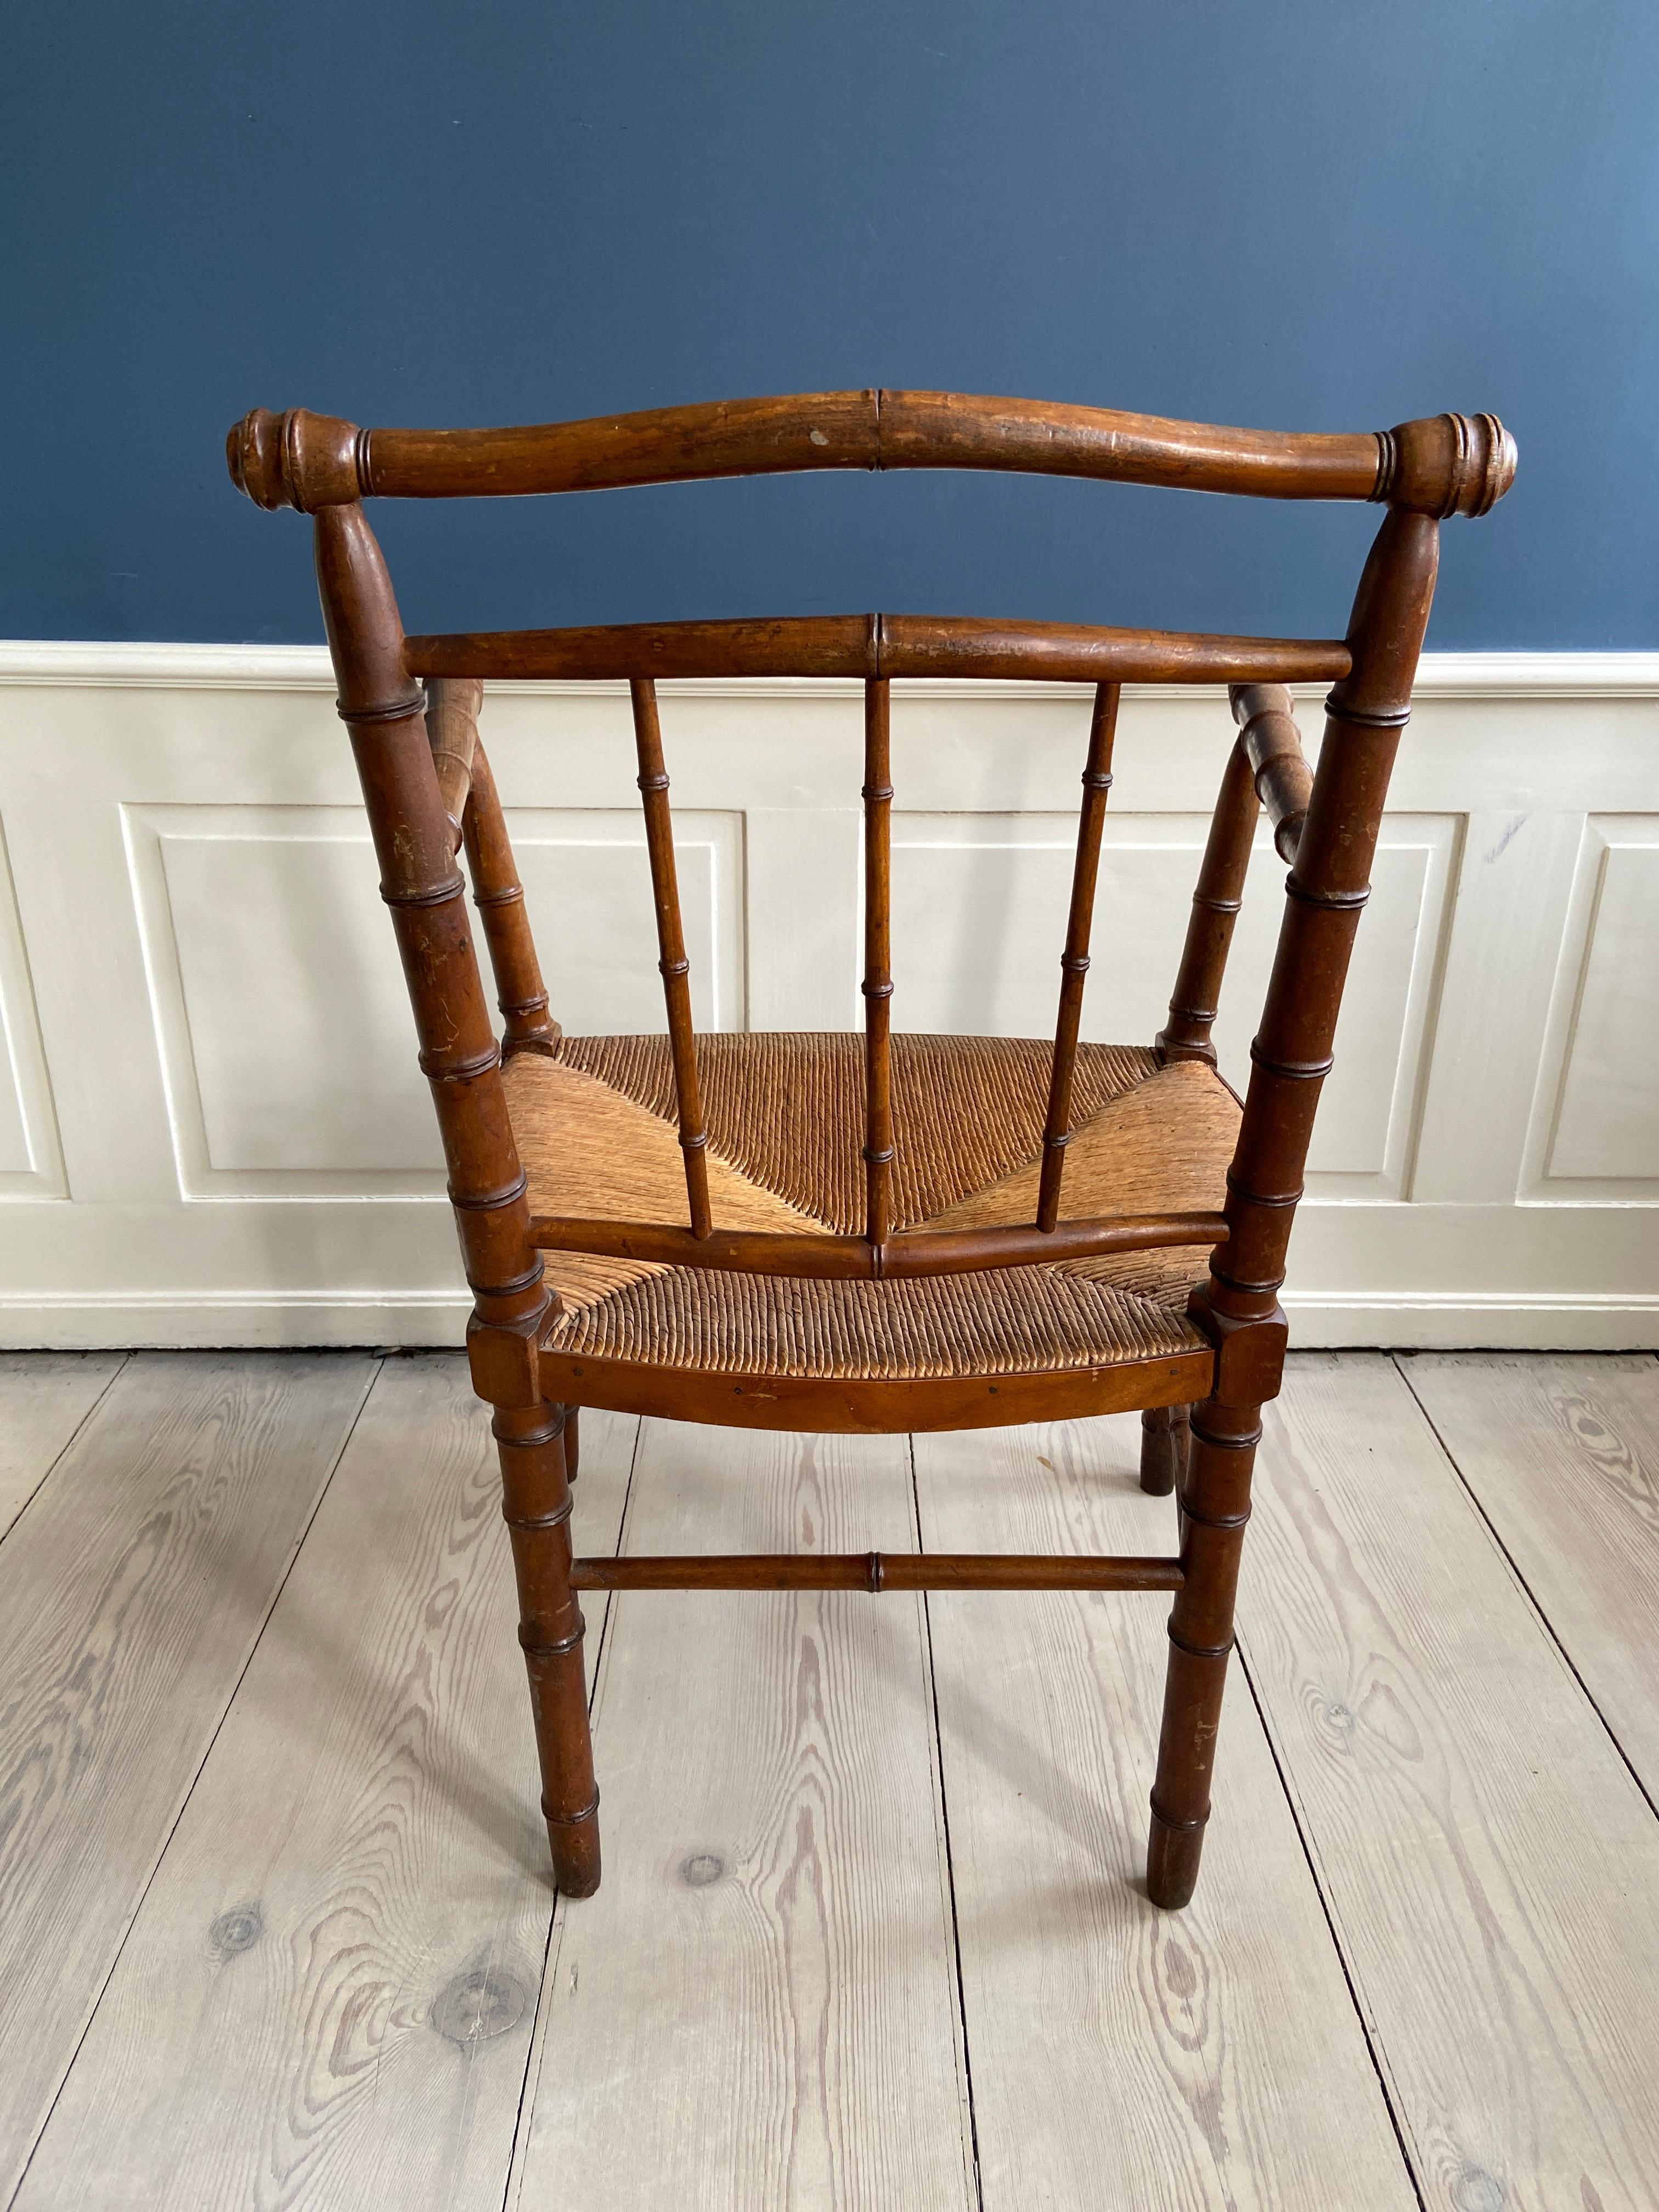 Vintage Armchair in Faux Bamboo and Wicker Seat, France, Early 20th Century For Sale 5